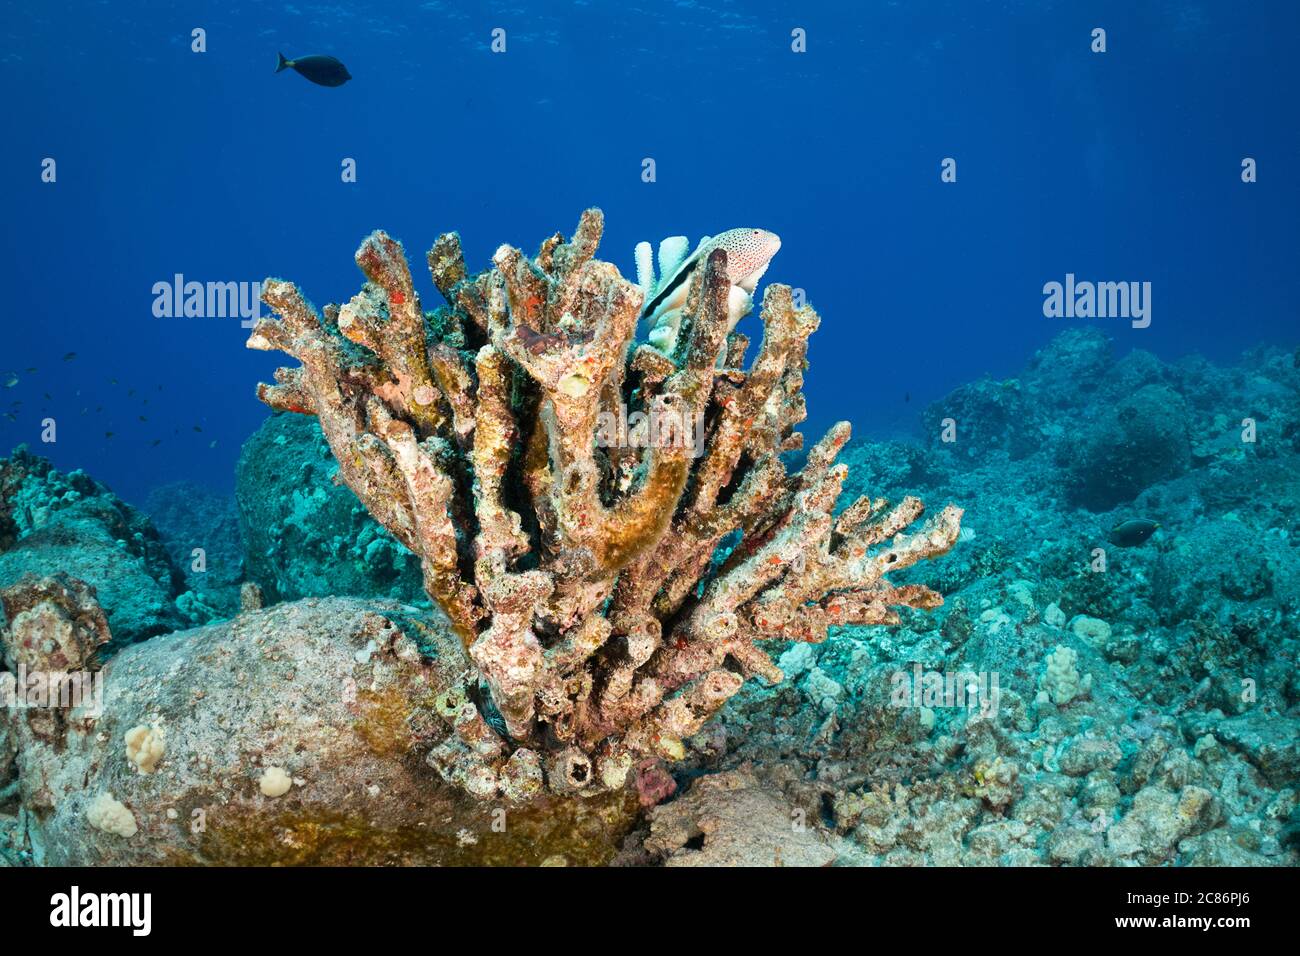 blackside hawkfish, Paracirrhites forsteri, resting on antler coral that has bleached and died due to high water temperatures, Kona Hawaii Stock Photo